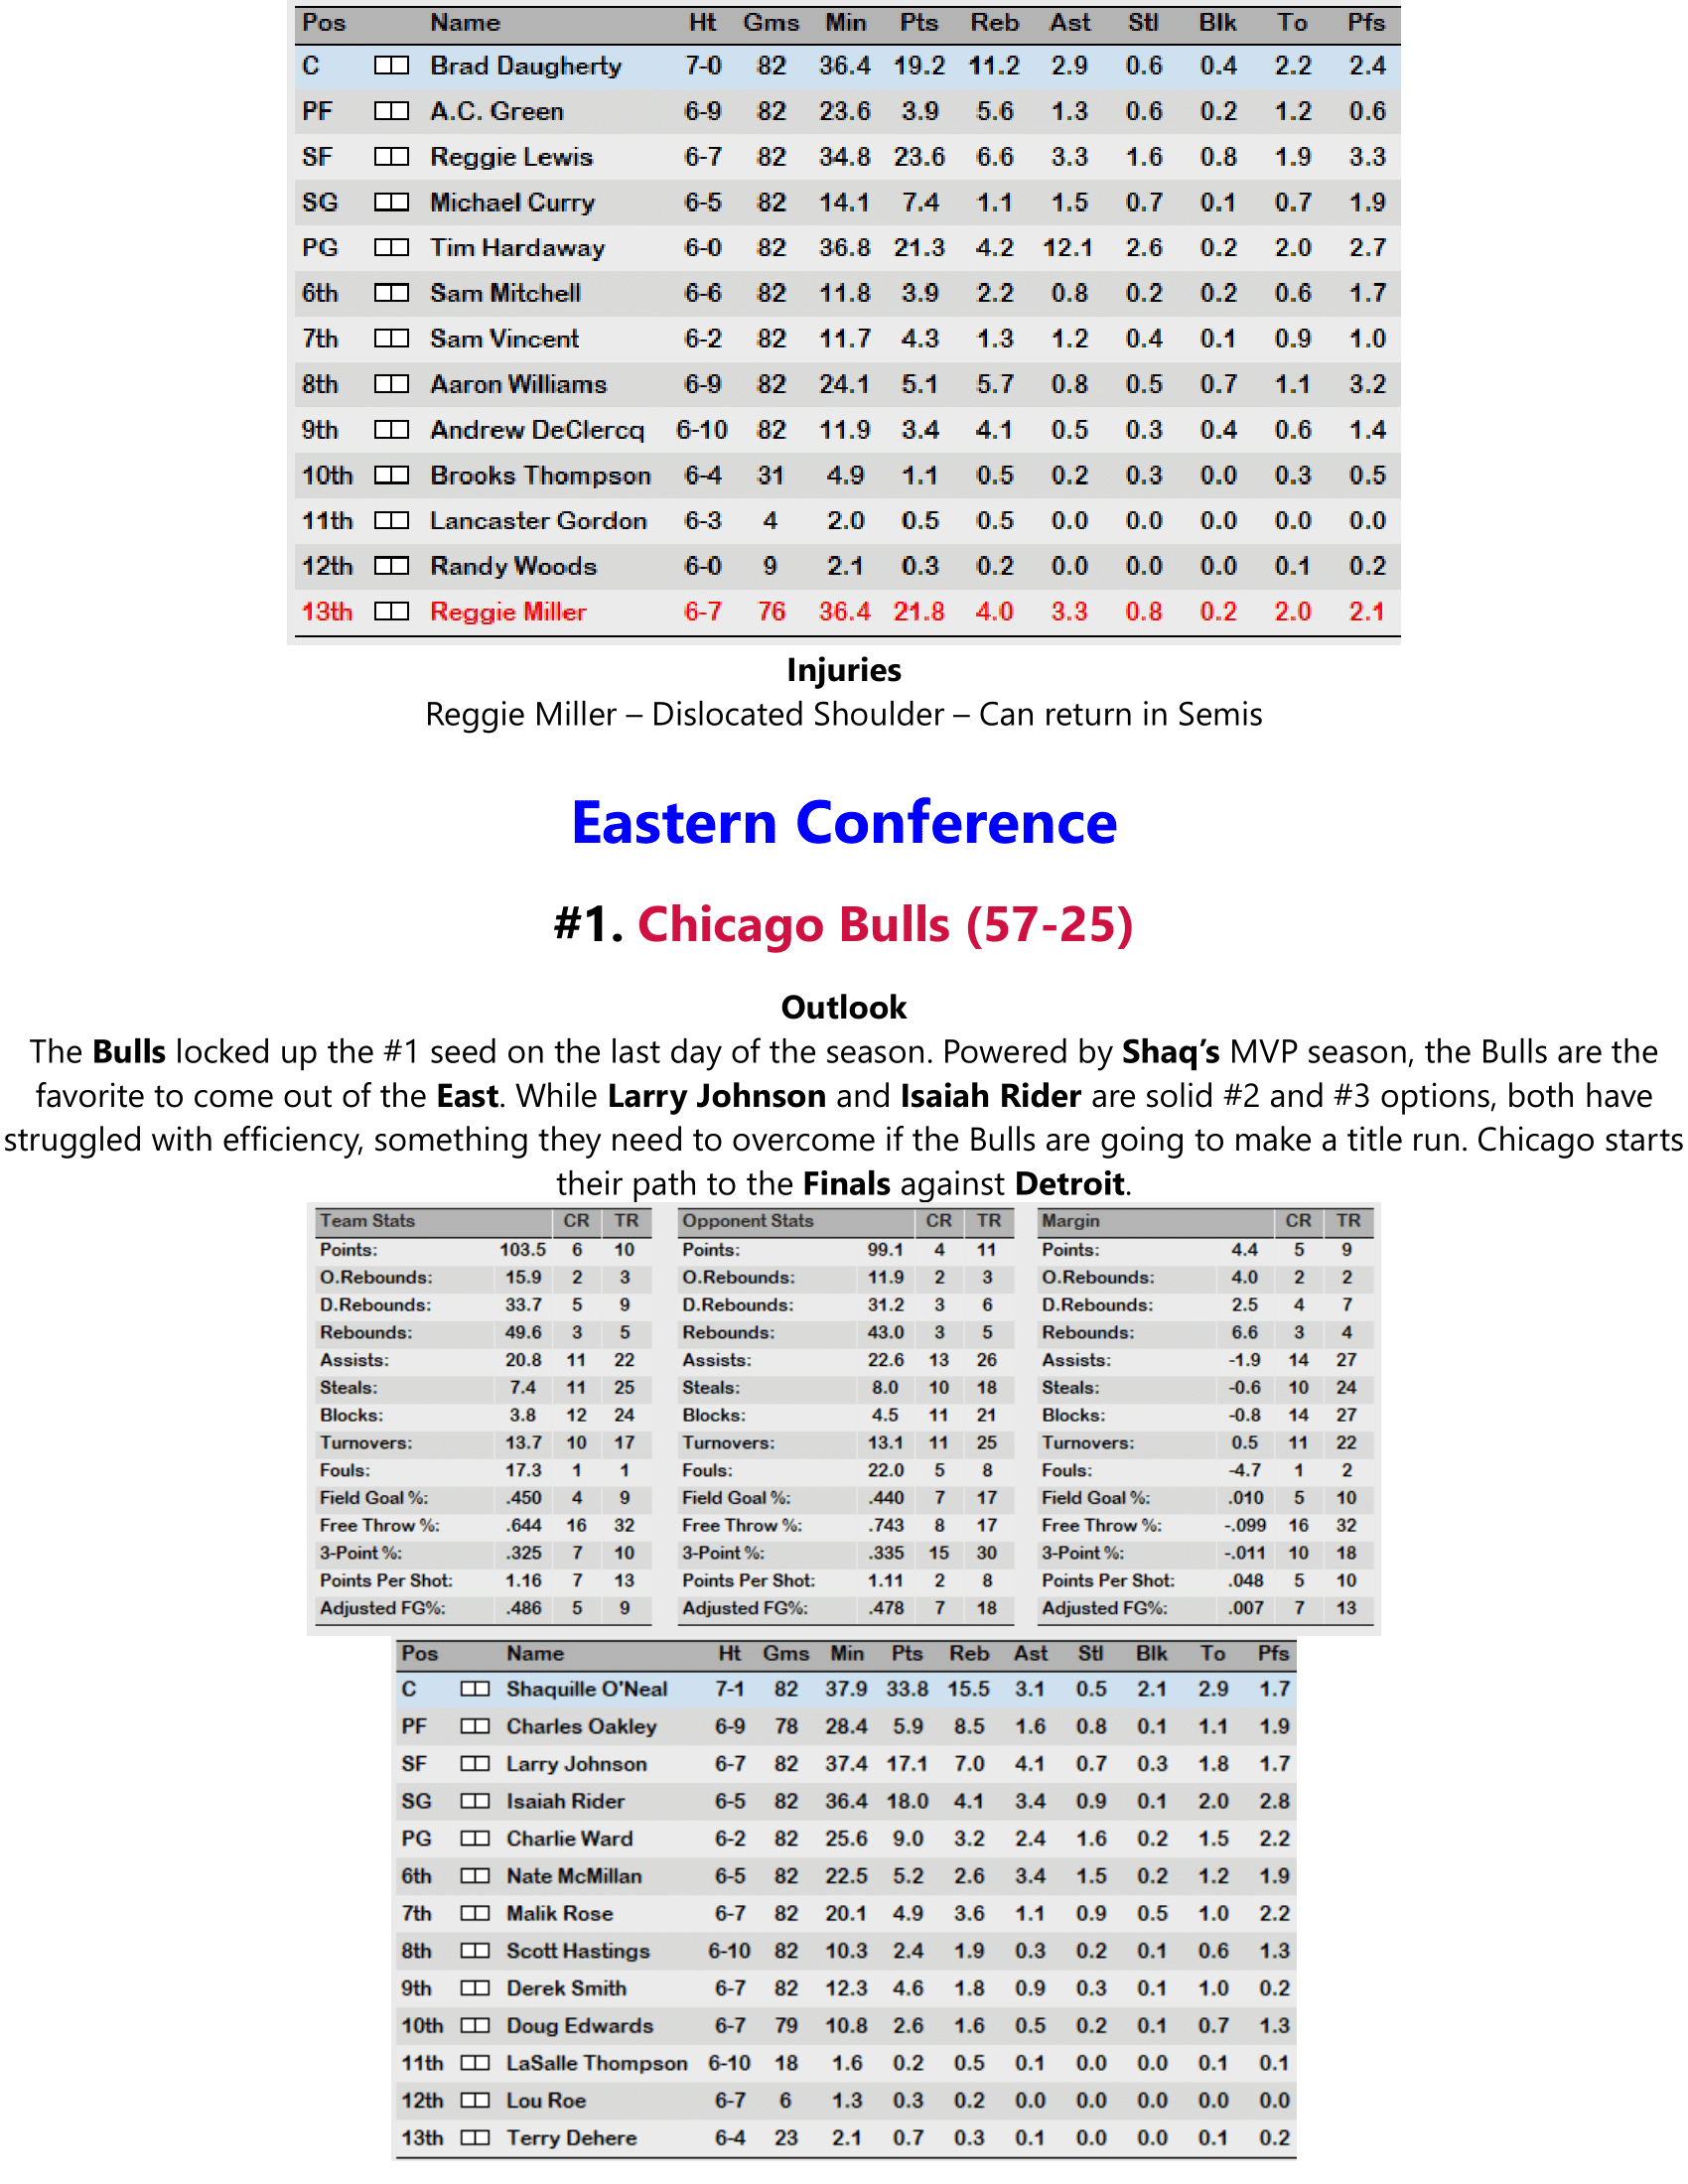 96-97-Part-3-Playoff-Preview-09.png